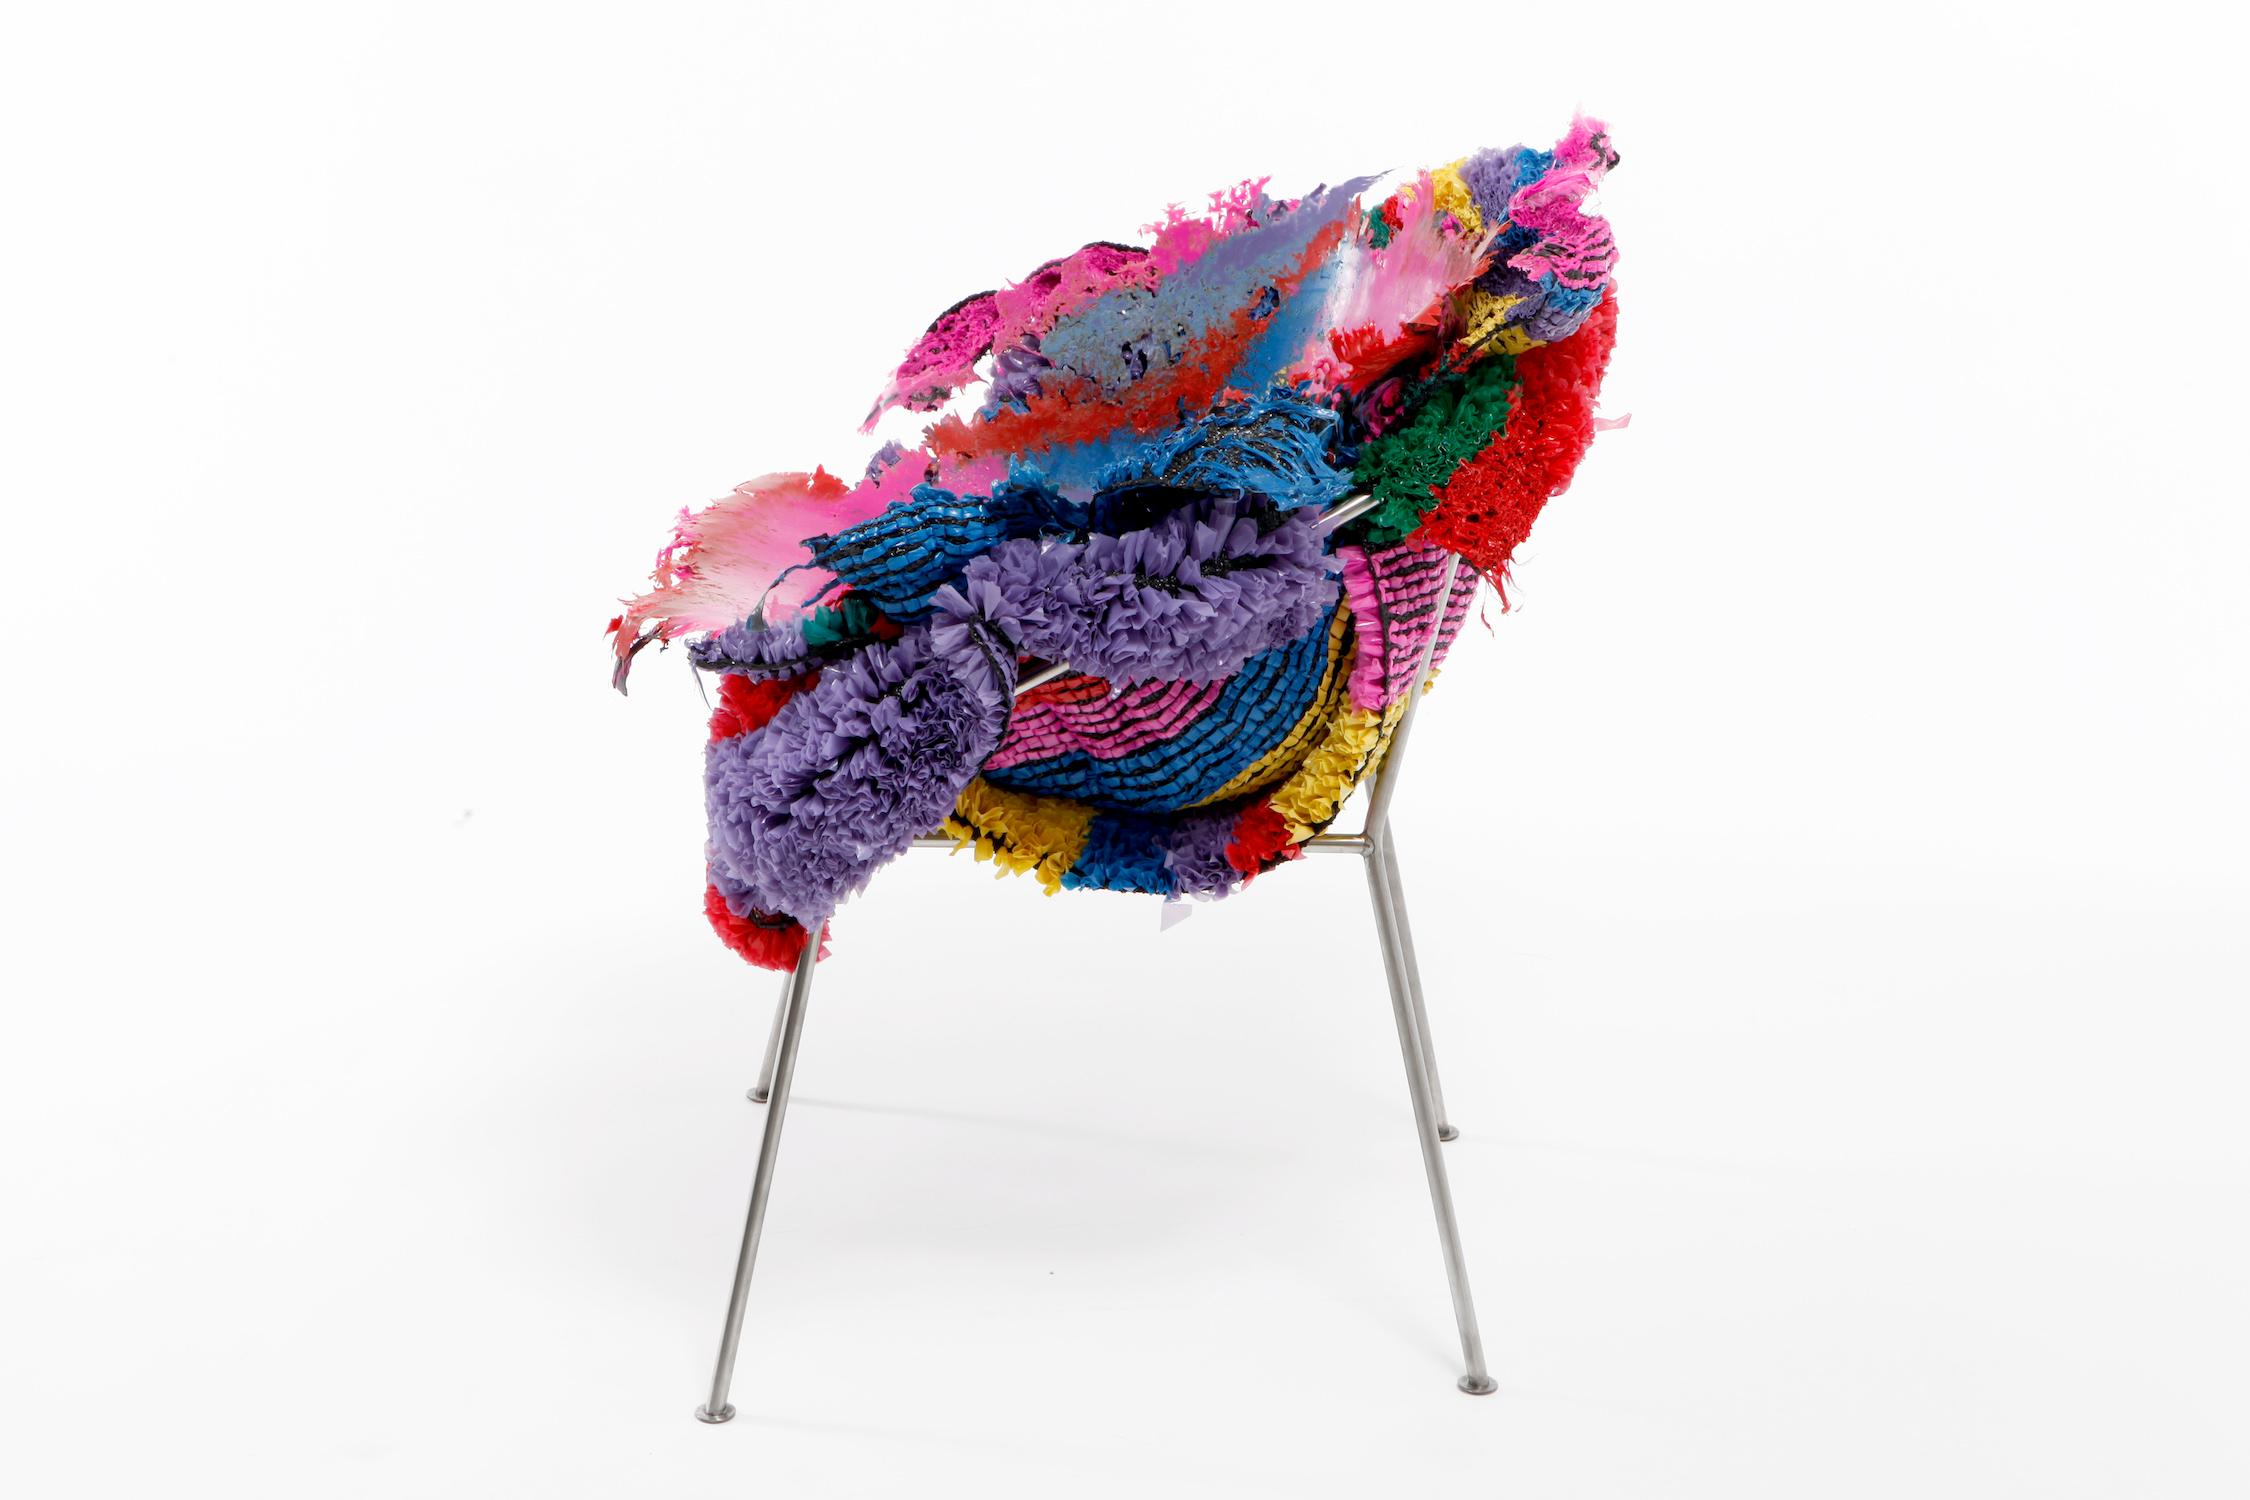 'Meltdown Chair, PE Stripe' is a piece by English artist Tom Price, from the Meltdown Series. This chair is made from plastic rugs and a stainless-steel frame. The artist assembles a stack of colourful woven plastic rugs and then he presses it on a